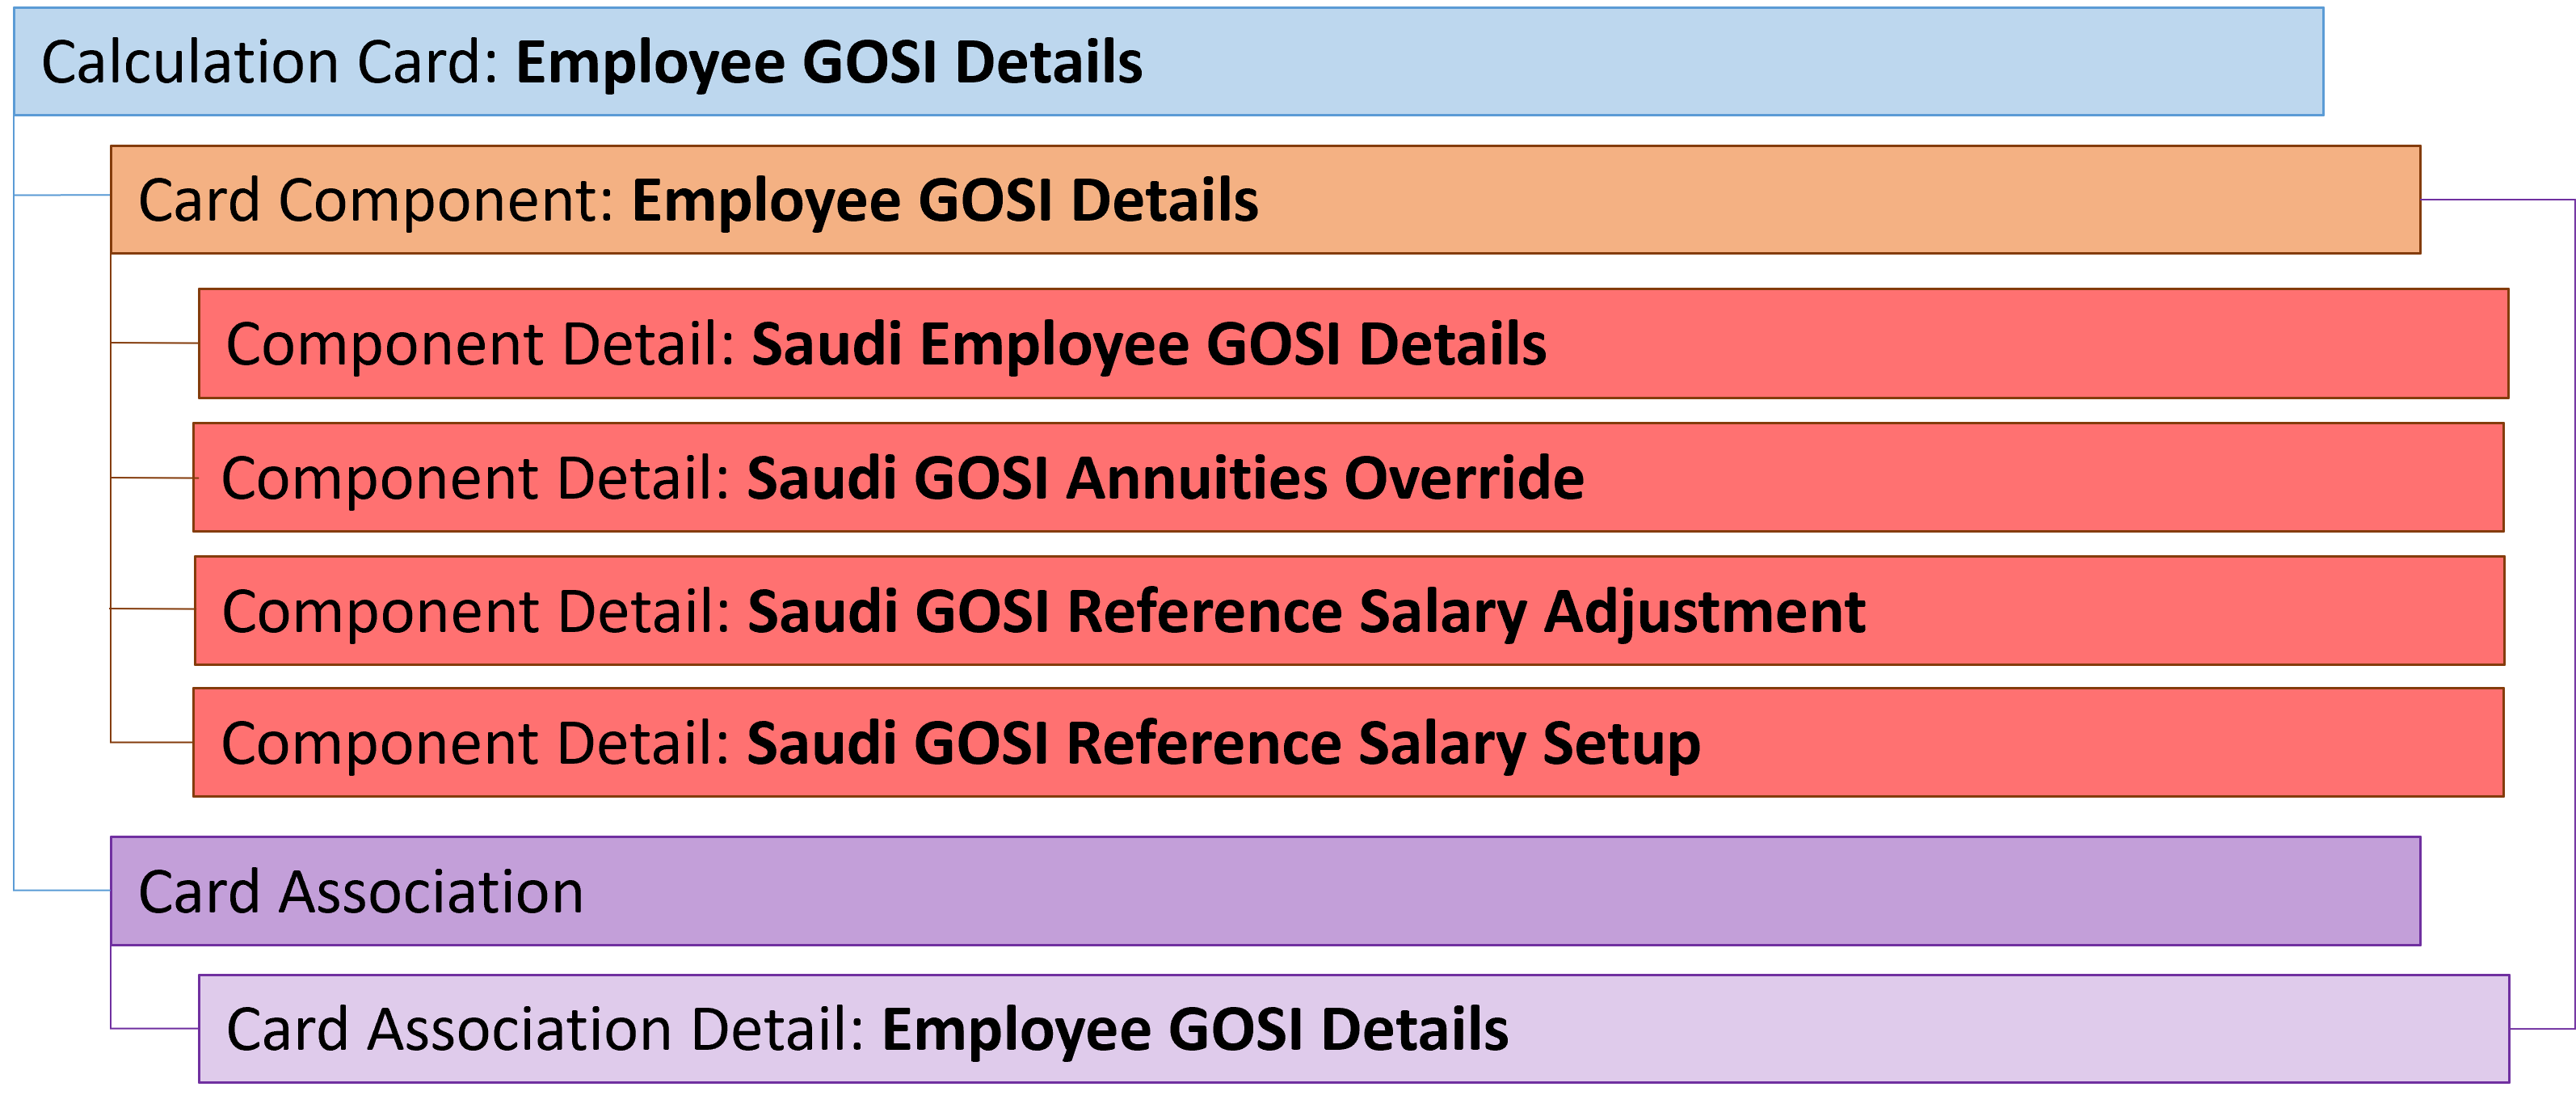 employee gosi details card hierarchy